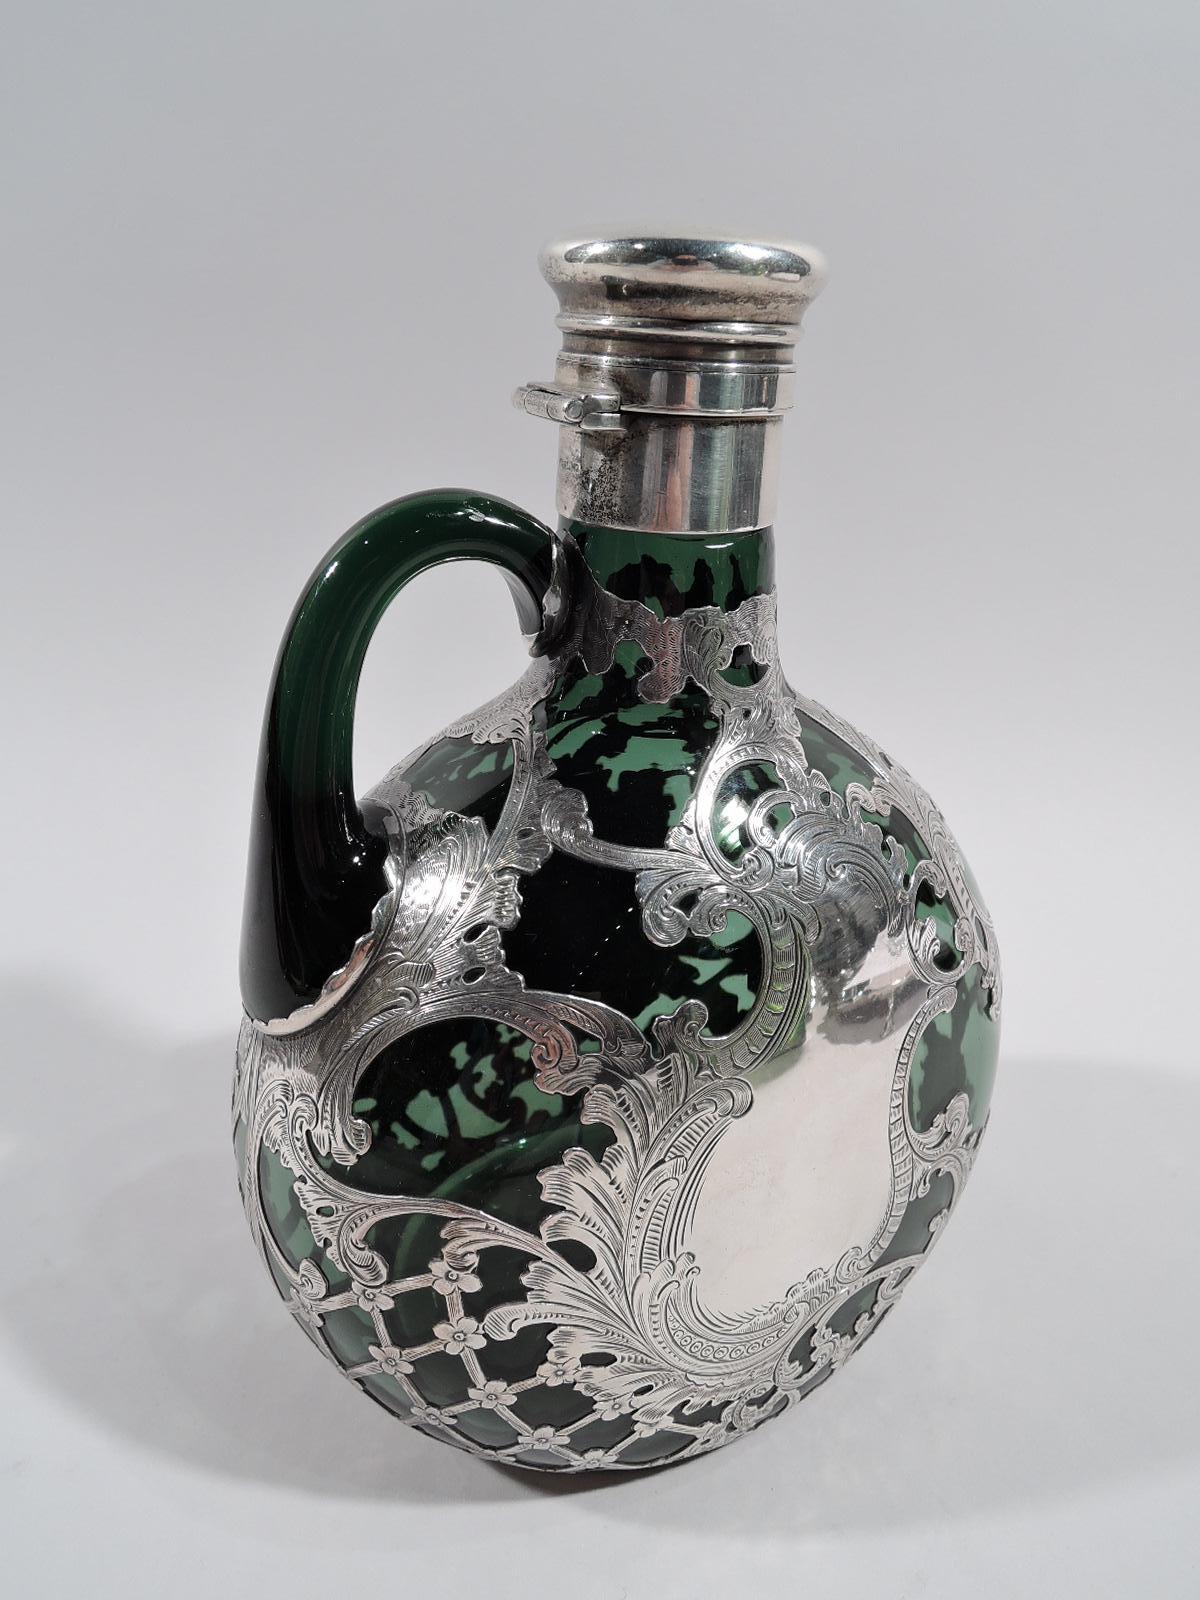 Turn-of-the-century Art Nouveau glass jug decanter with silver overlay. Made by Gorham in Providence. Round with flat front and back; neck cylindrical with sterling silver collar and hinged and cork-lined cover. Loose and meandering leafy scrolls,